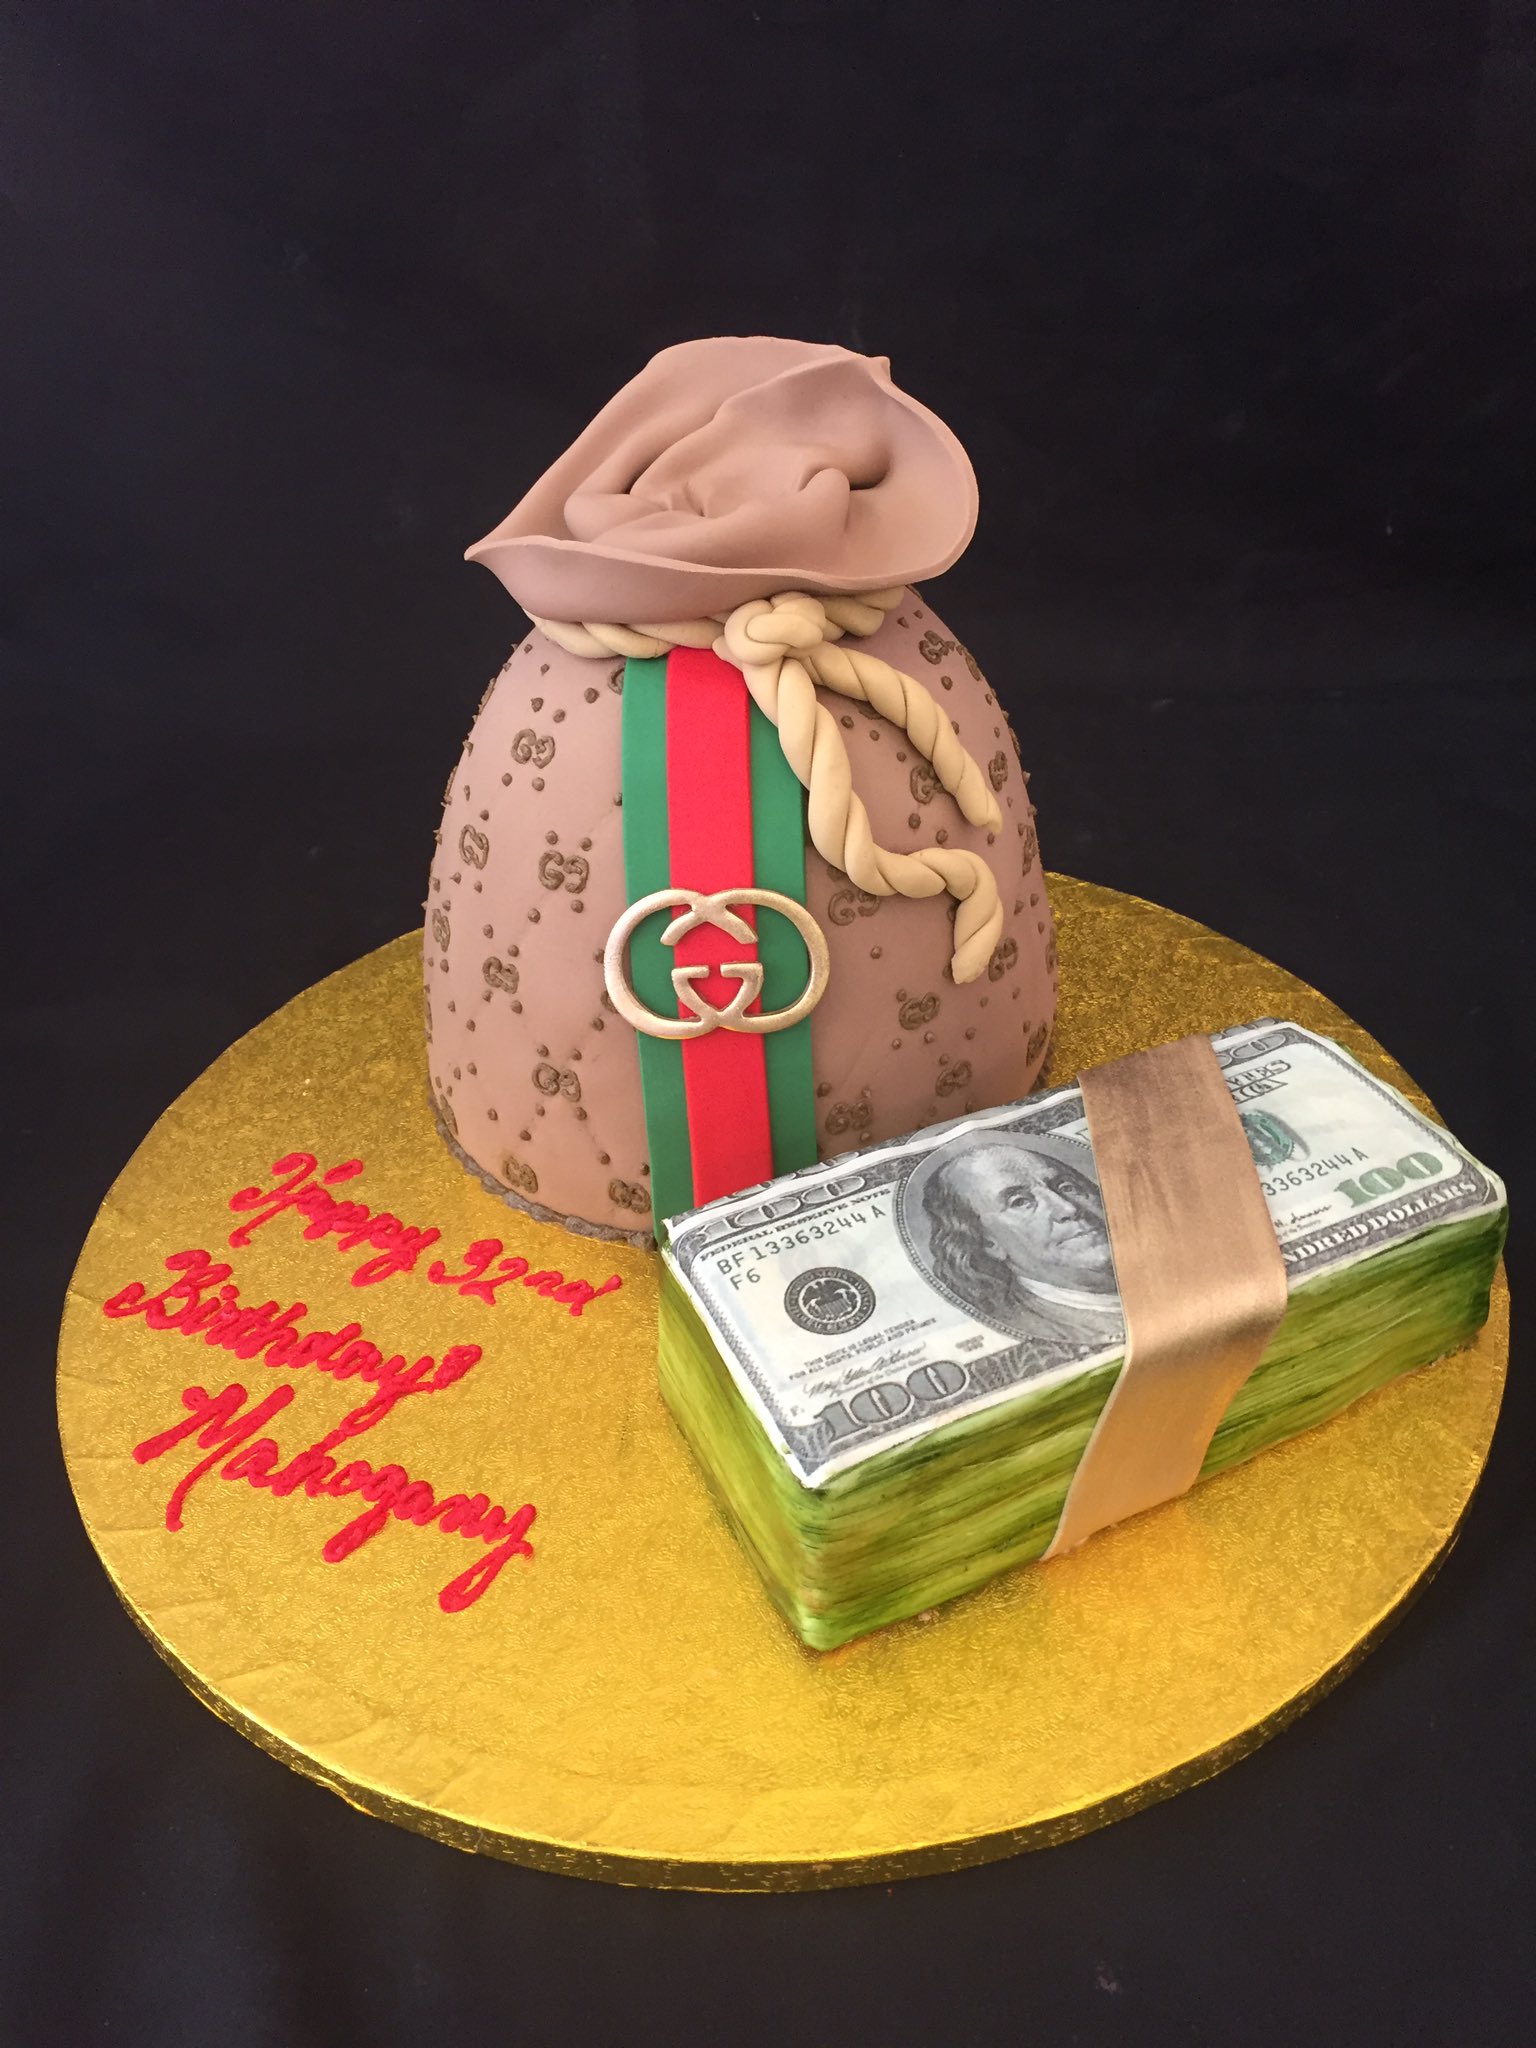 Gucci cake with roses and money